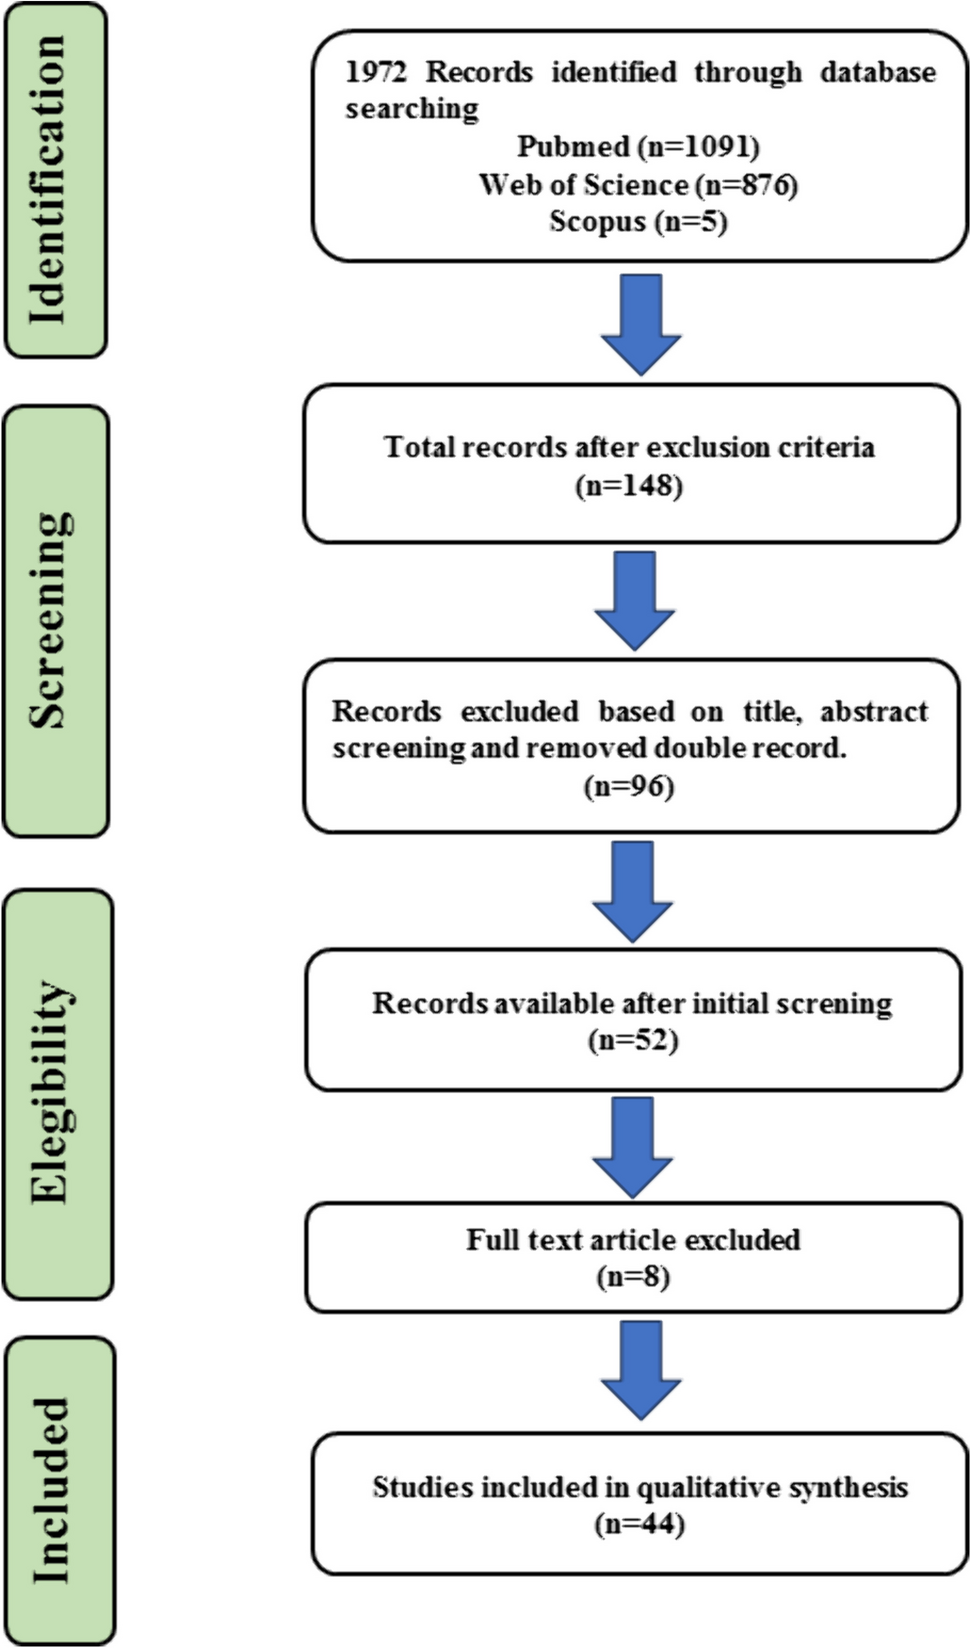 Self-mutilation: a systematic review